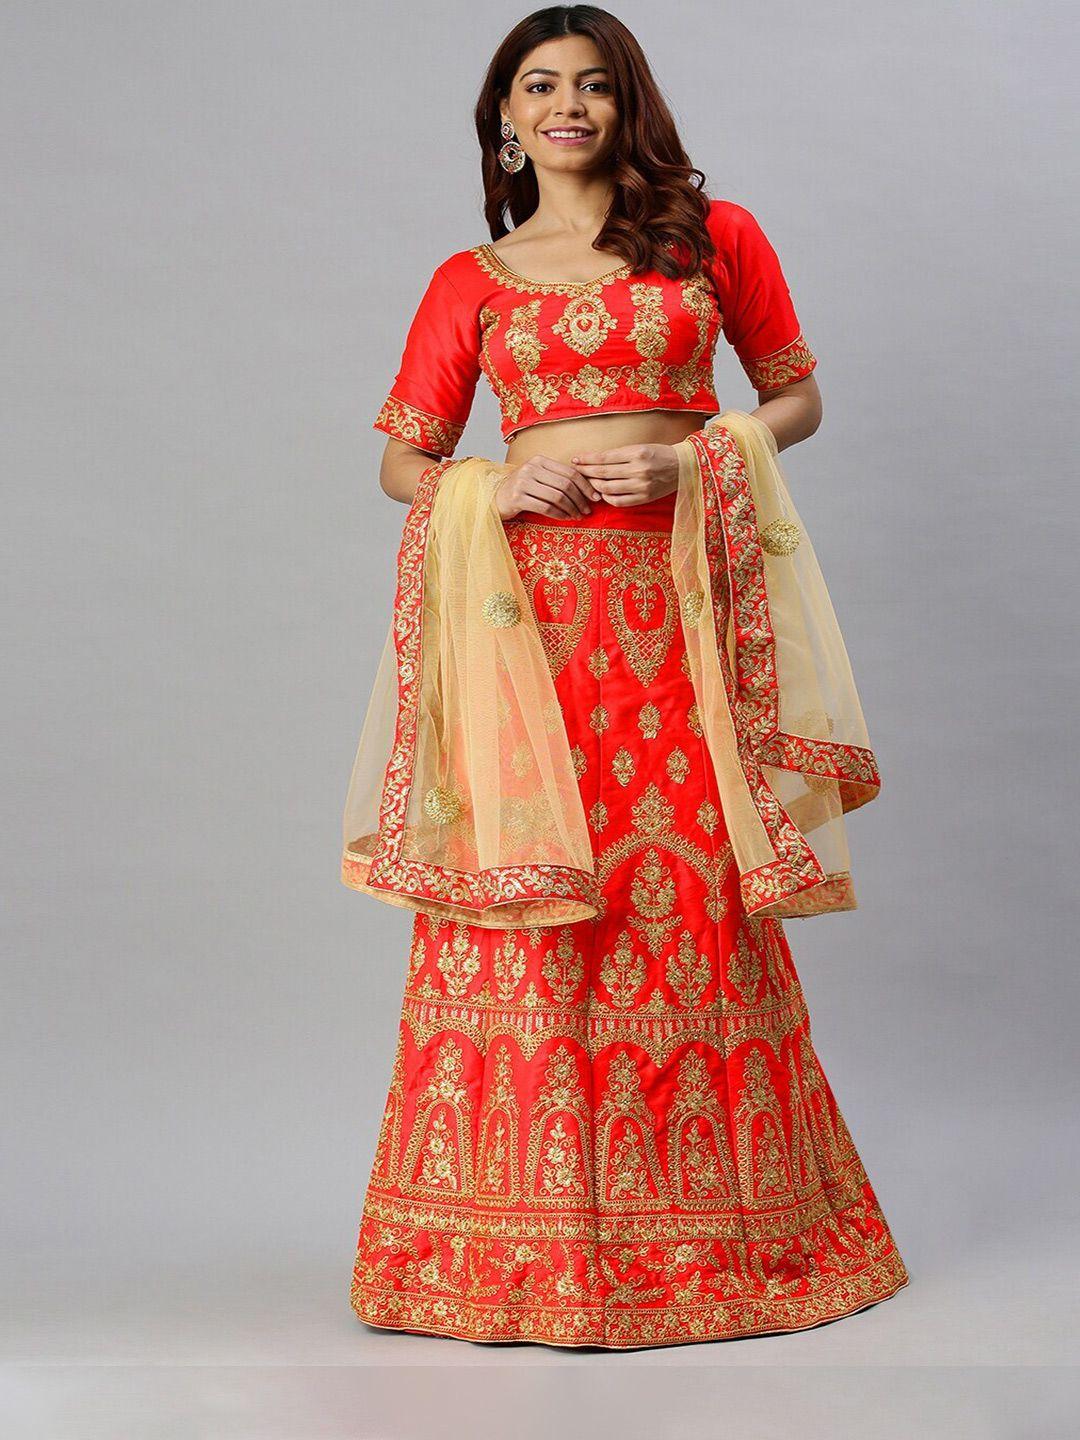 shadow & saining red & gold-toned embroidered semi-stitched lehenga unstitched blouse with dupatta